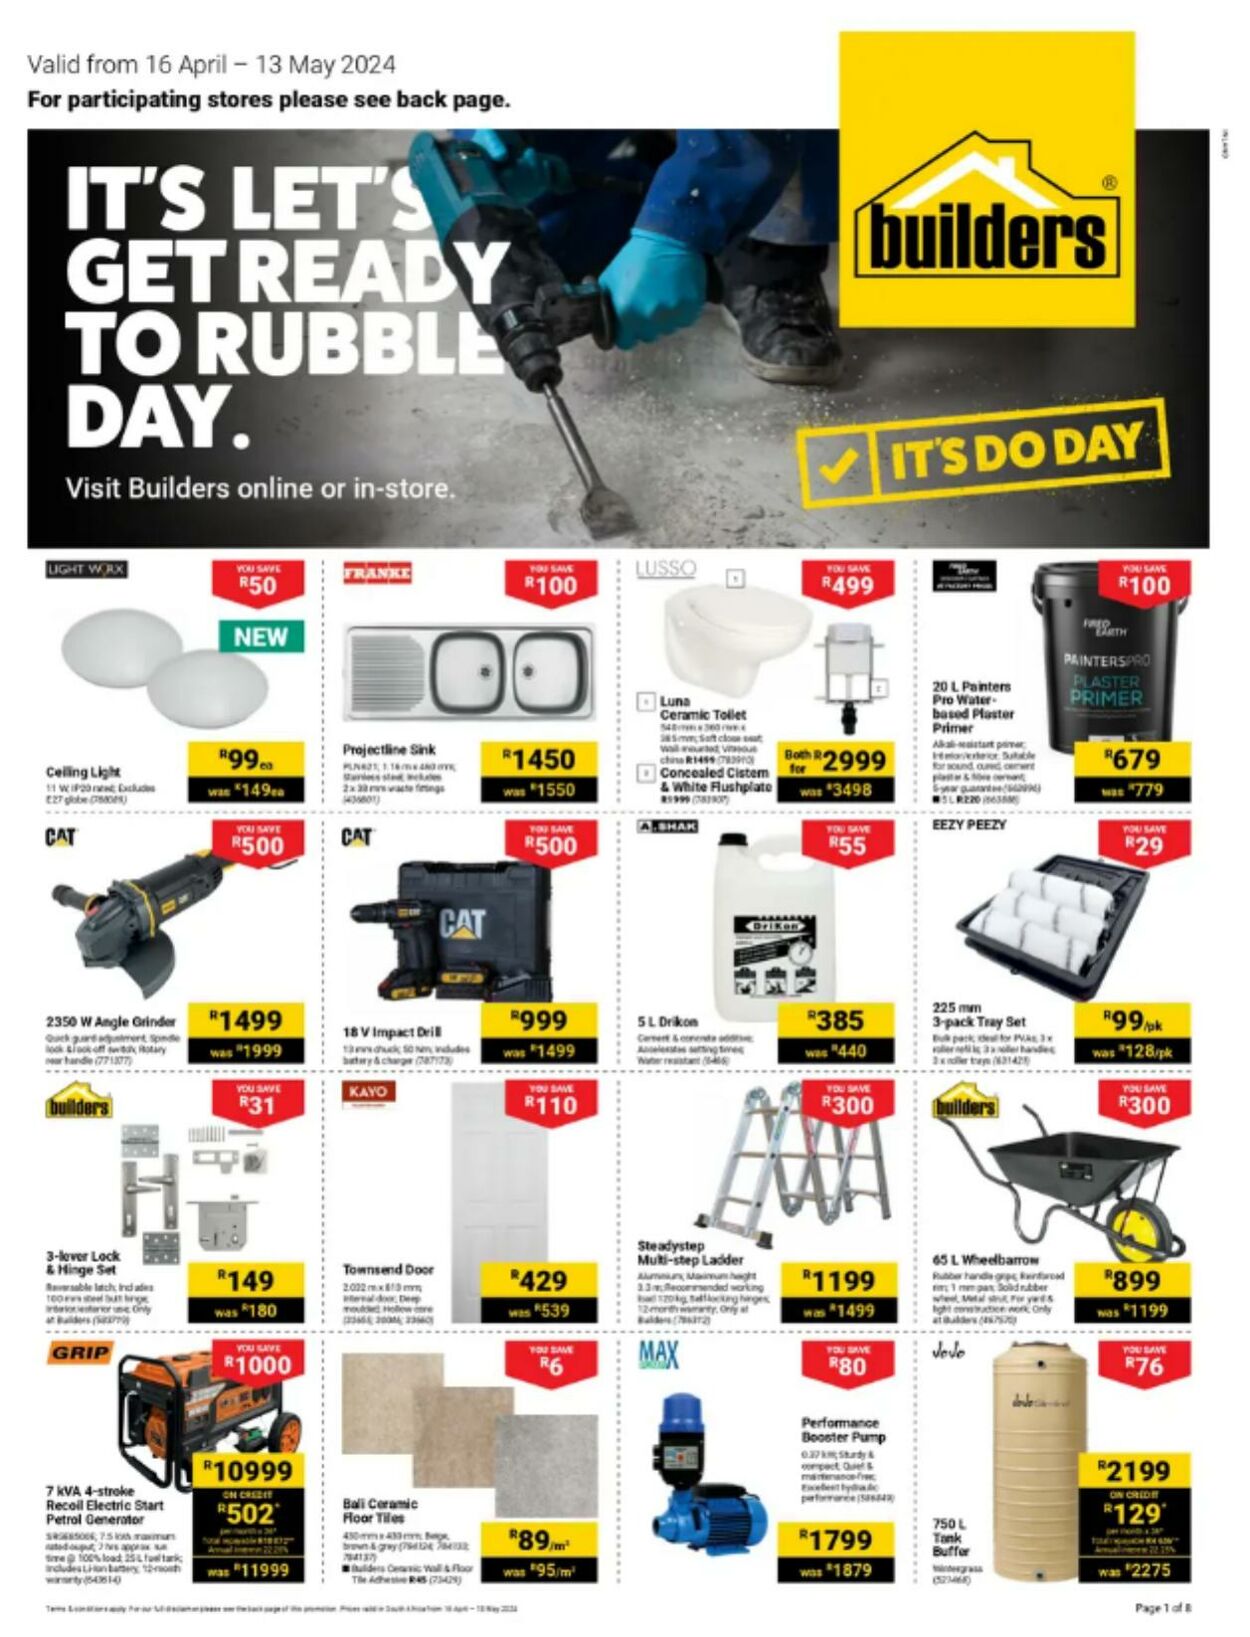 Builders Warehouse Promotional specials